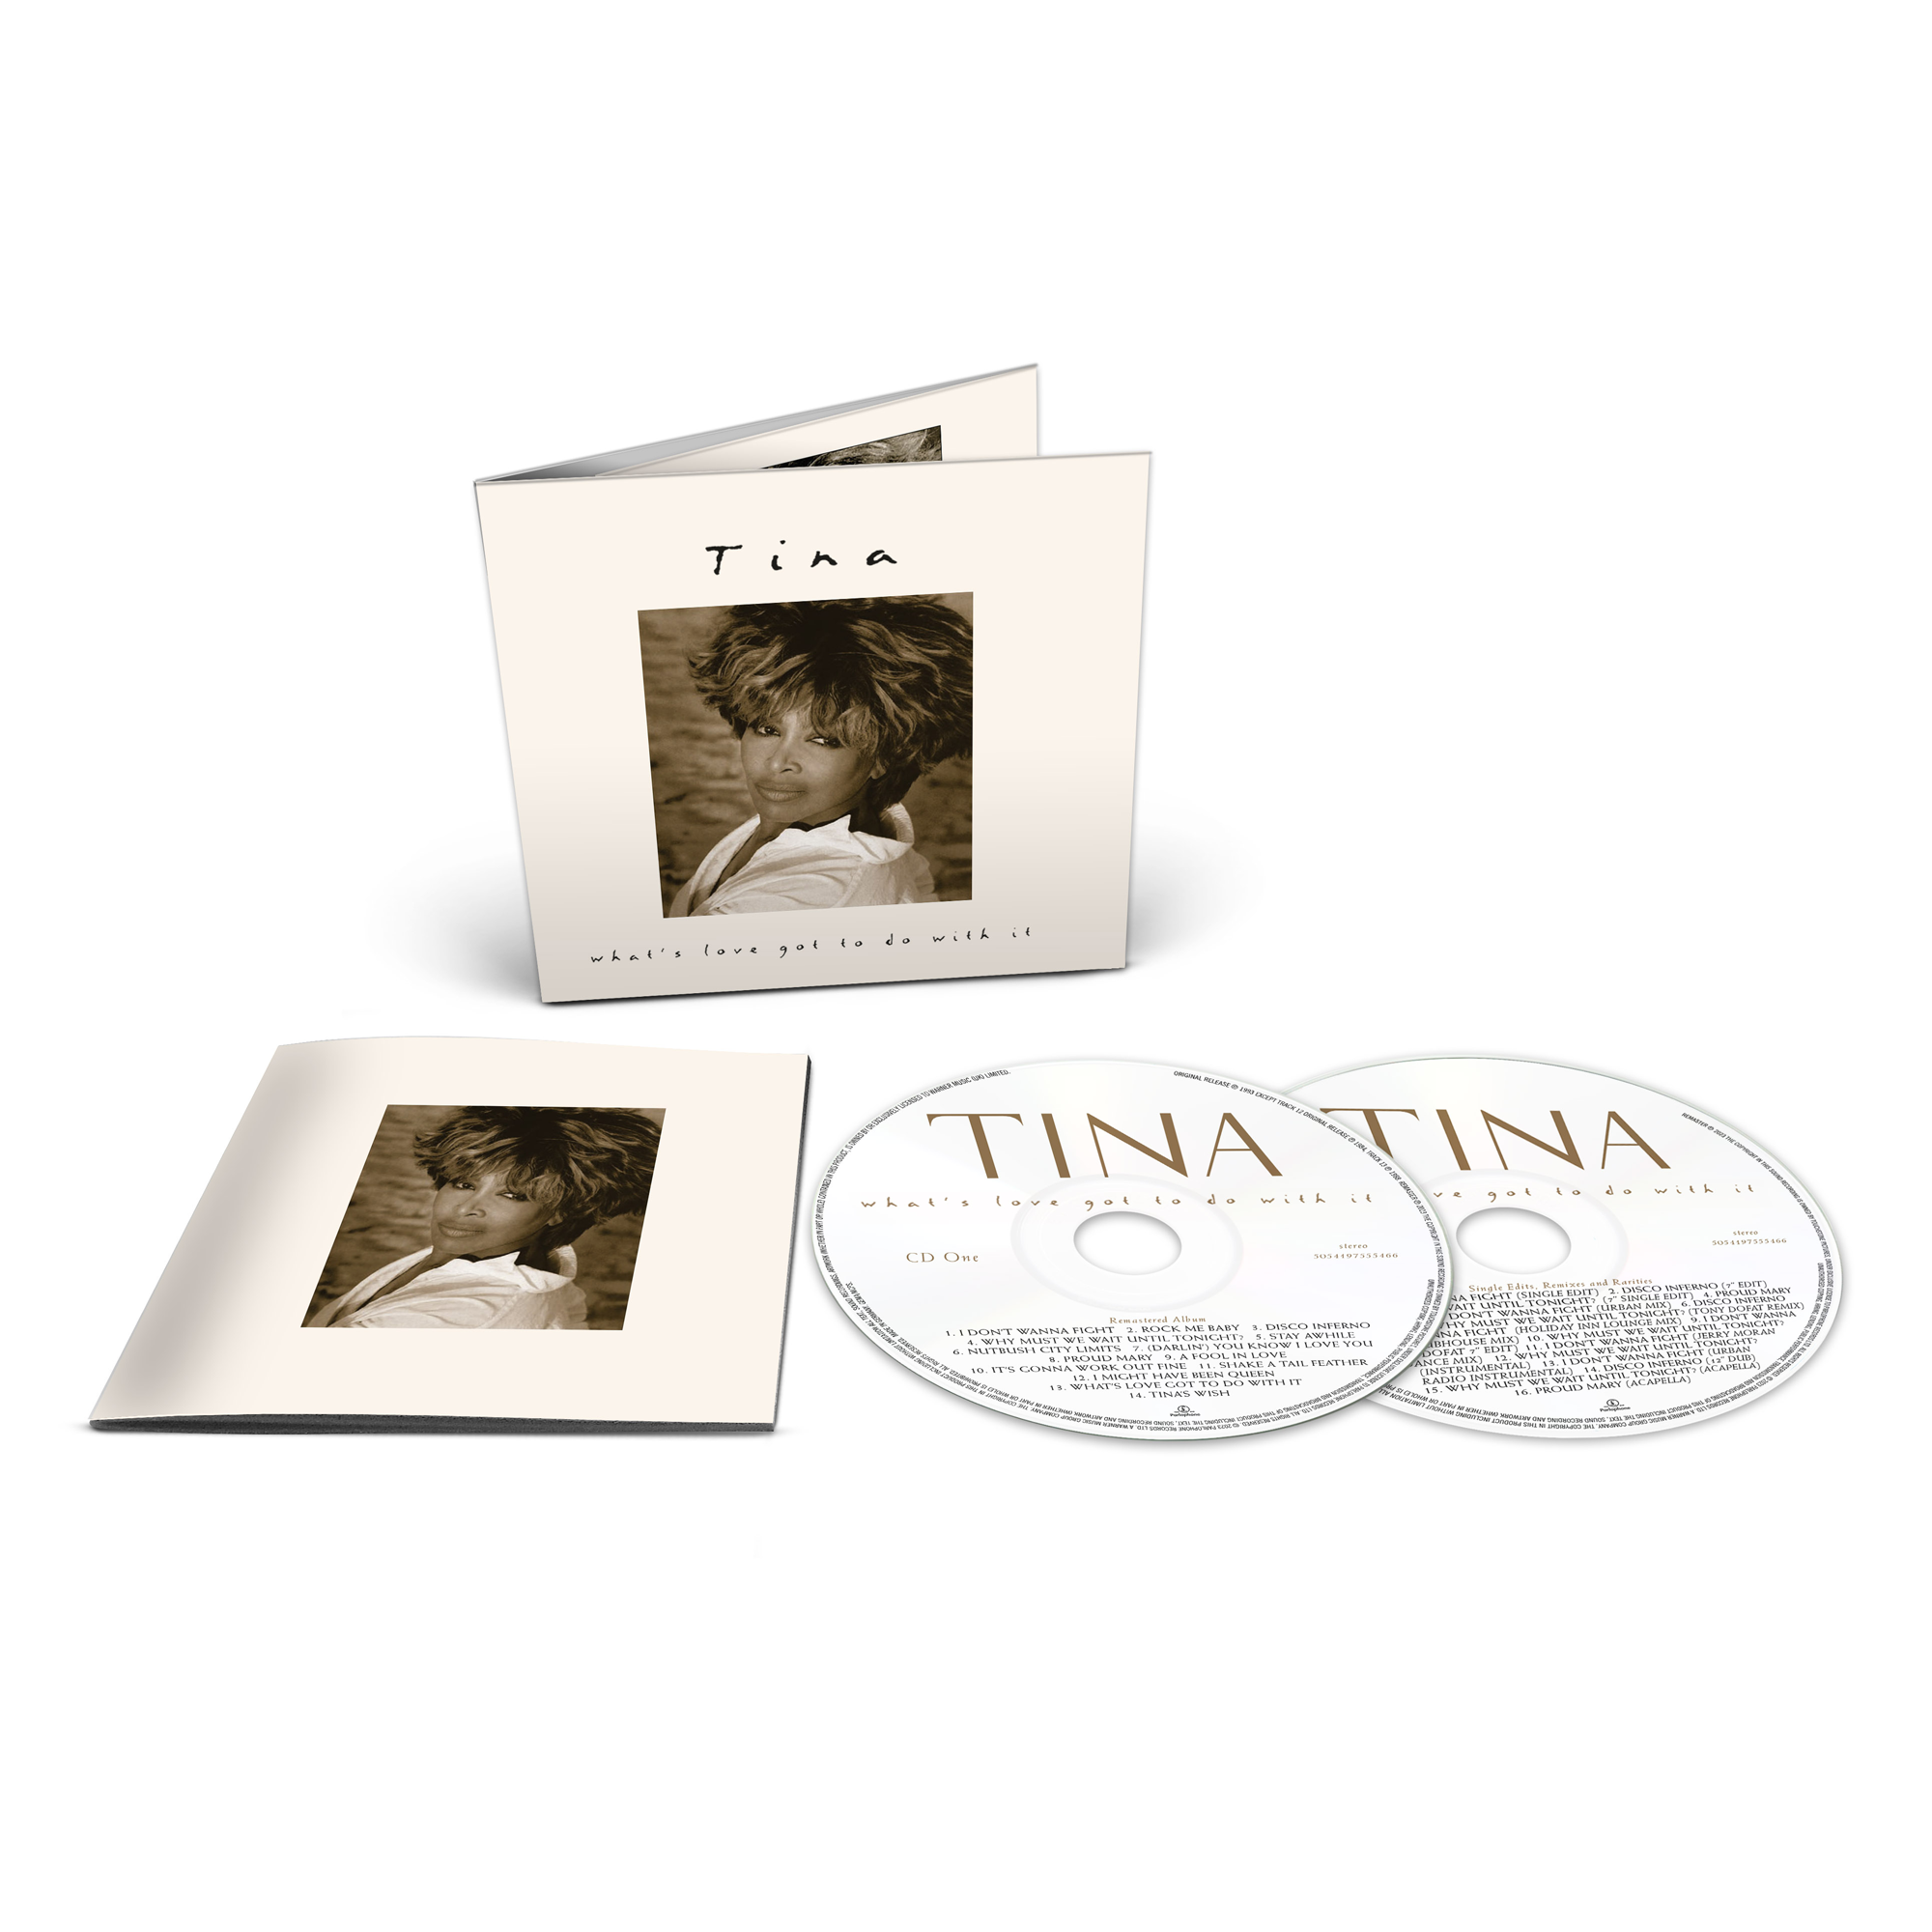 Tina Turner - What's Love Got To Do With It (30th Anniversary Edition): 2CD